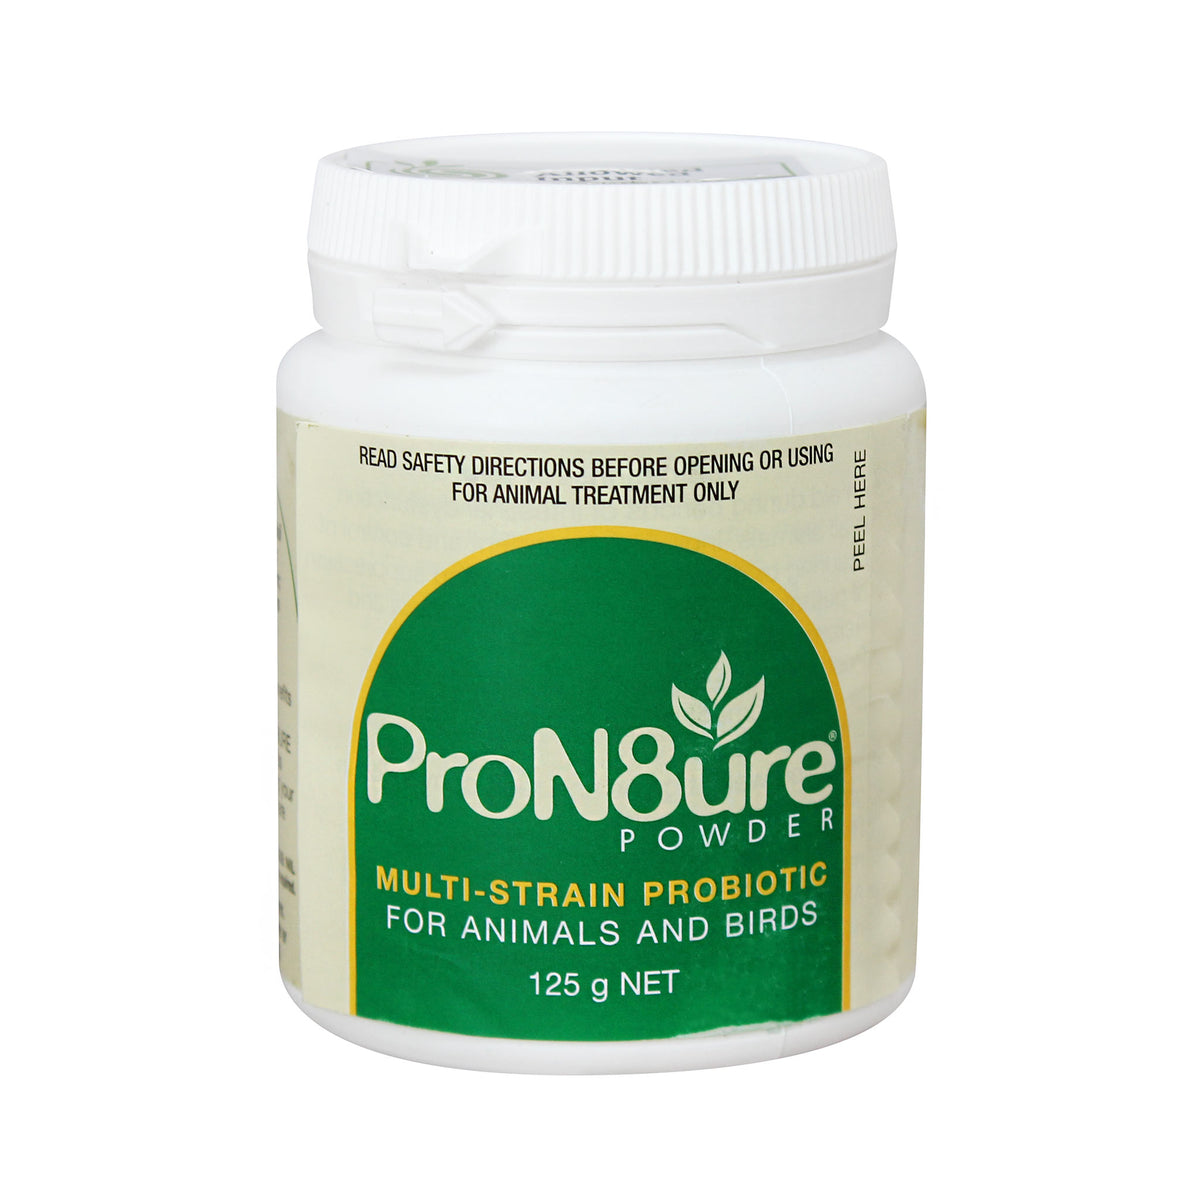 ProN8ure (formerly Protexin) Probiotic Powder